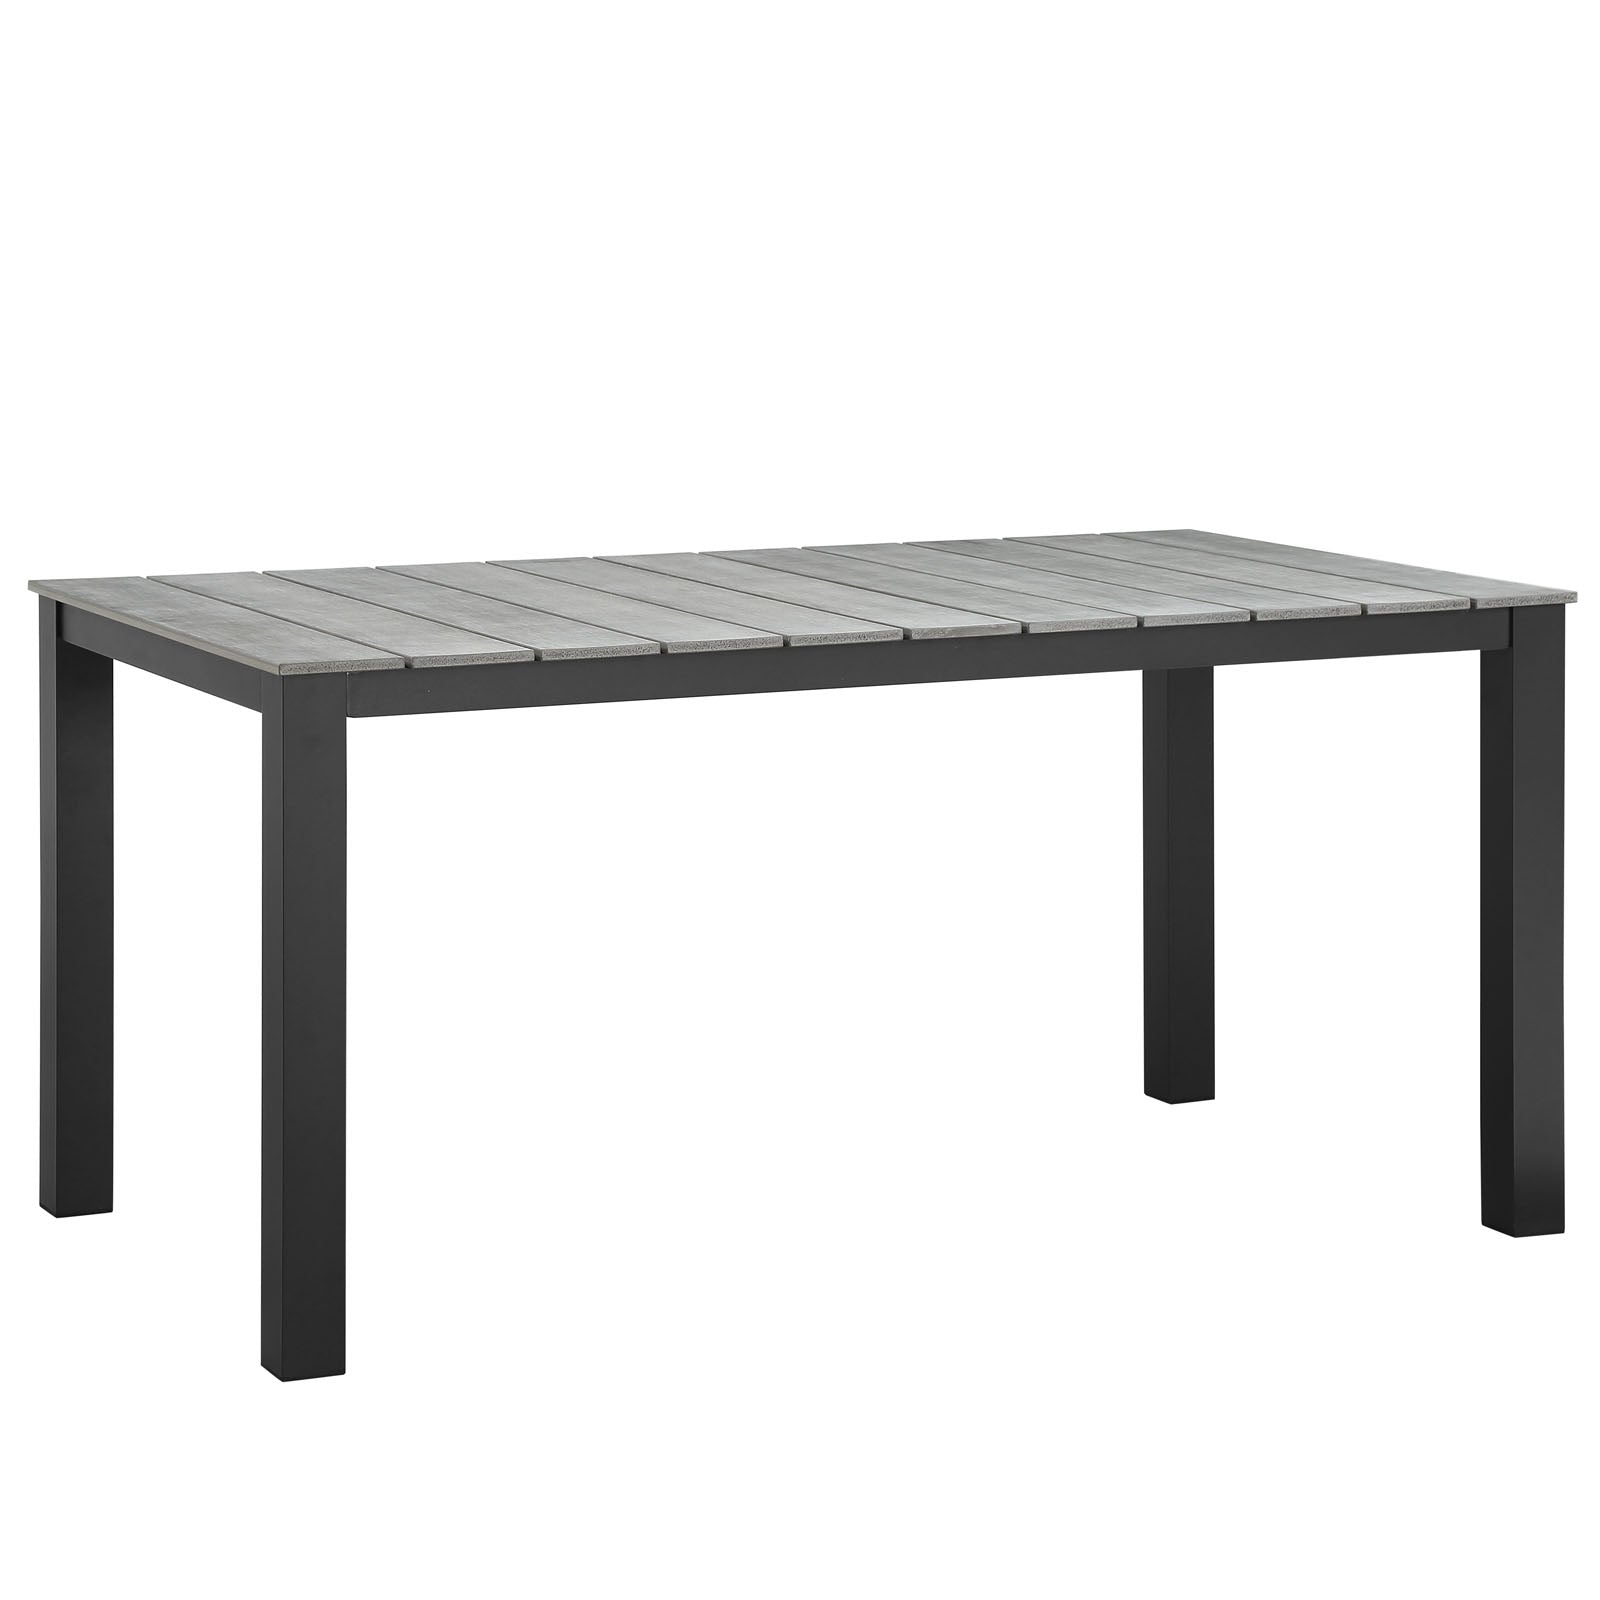 Maine 63" Outdoor Patio Dining Table - East Shore Modern Home Furnishings